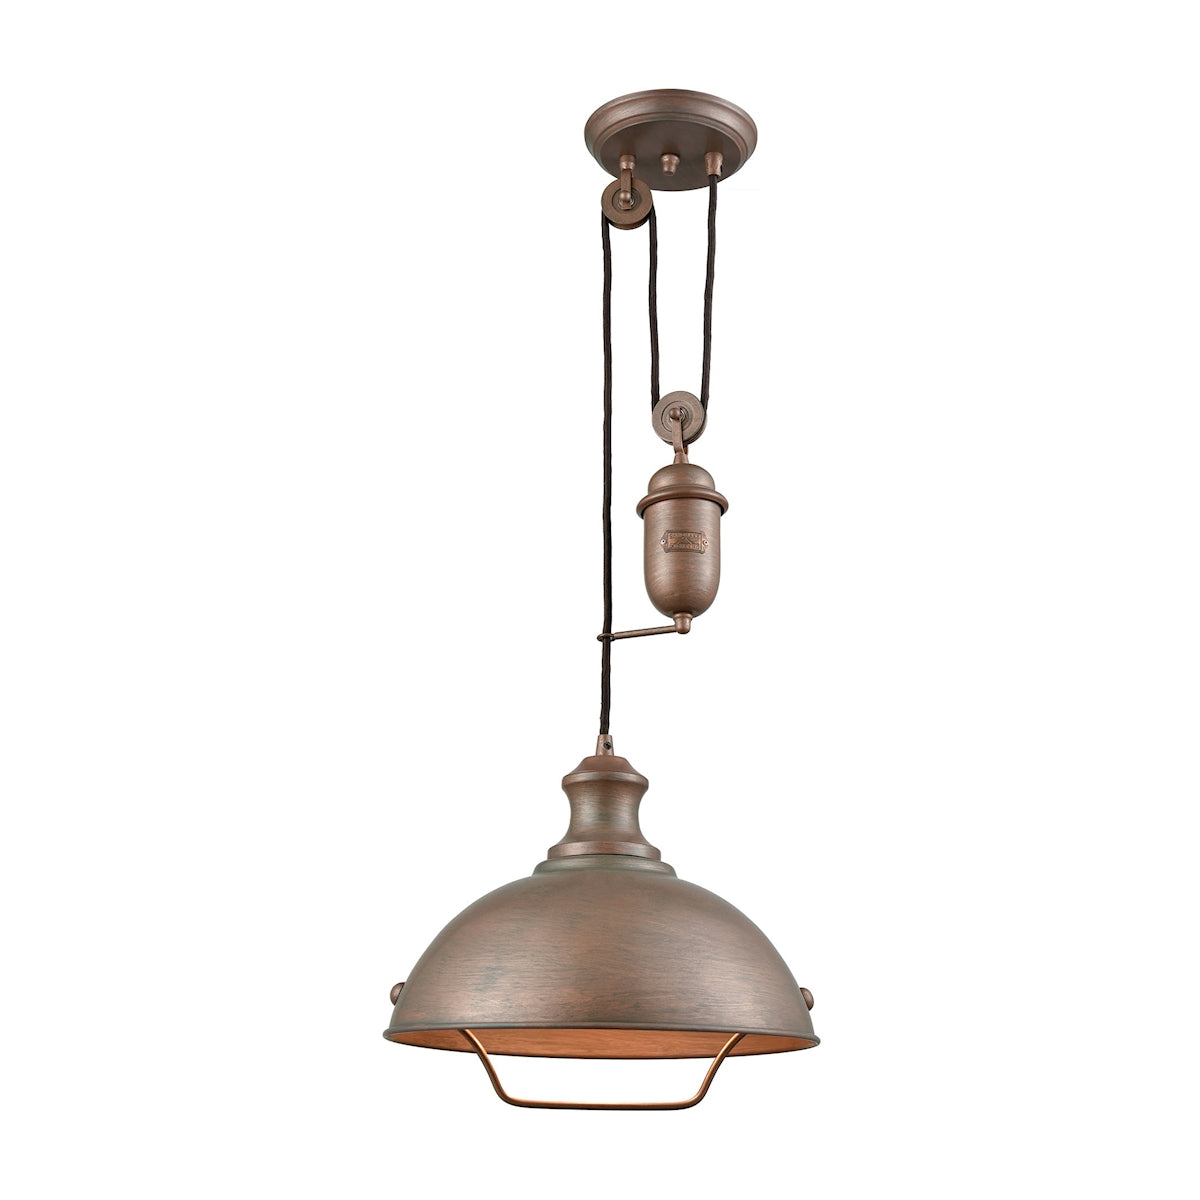 ELK Lighting 65271-1 Farmhouse 1-Light Adjustable Pendant in Tarnished Brass with Matching Shade